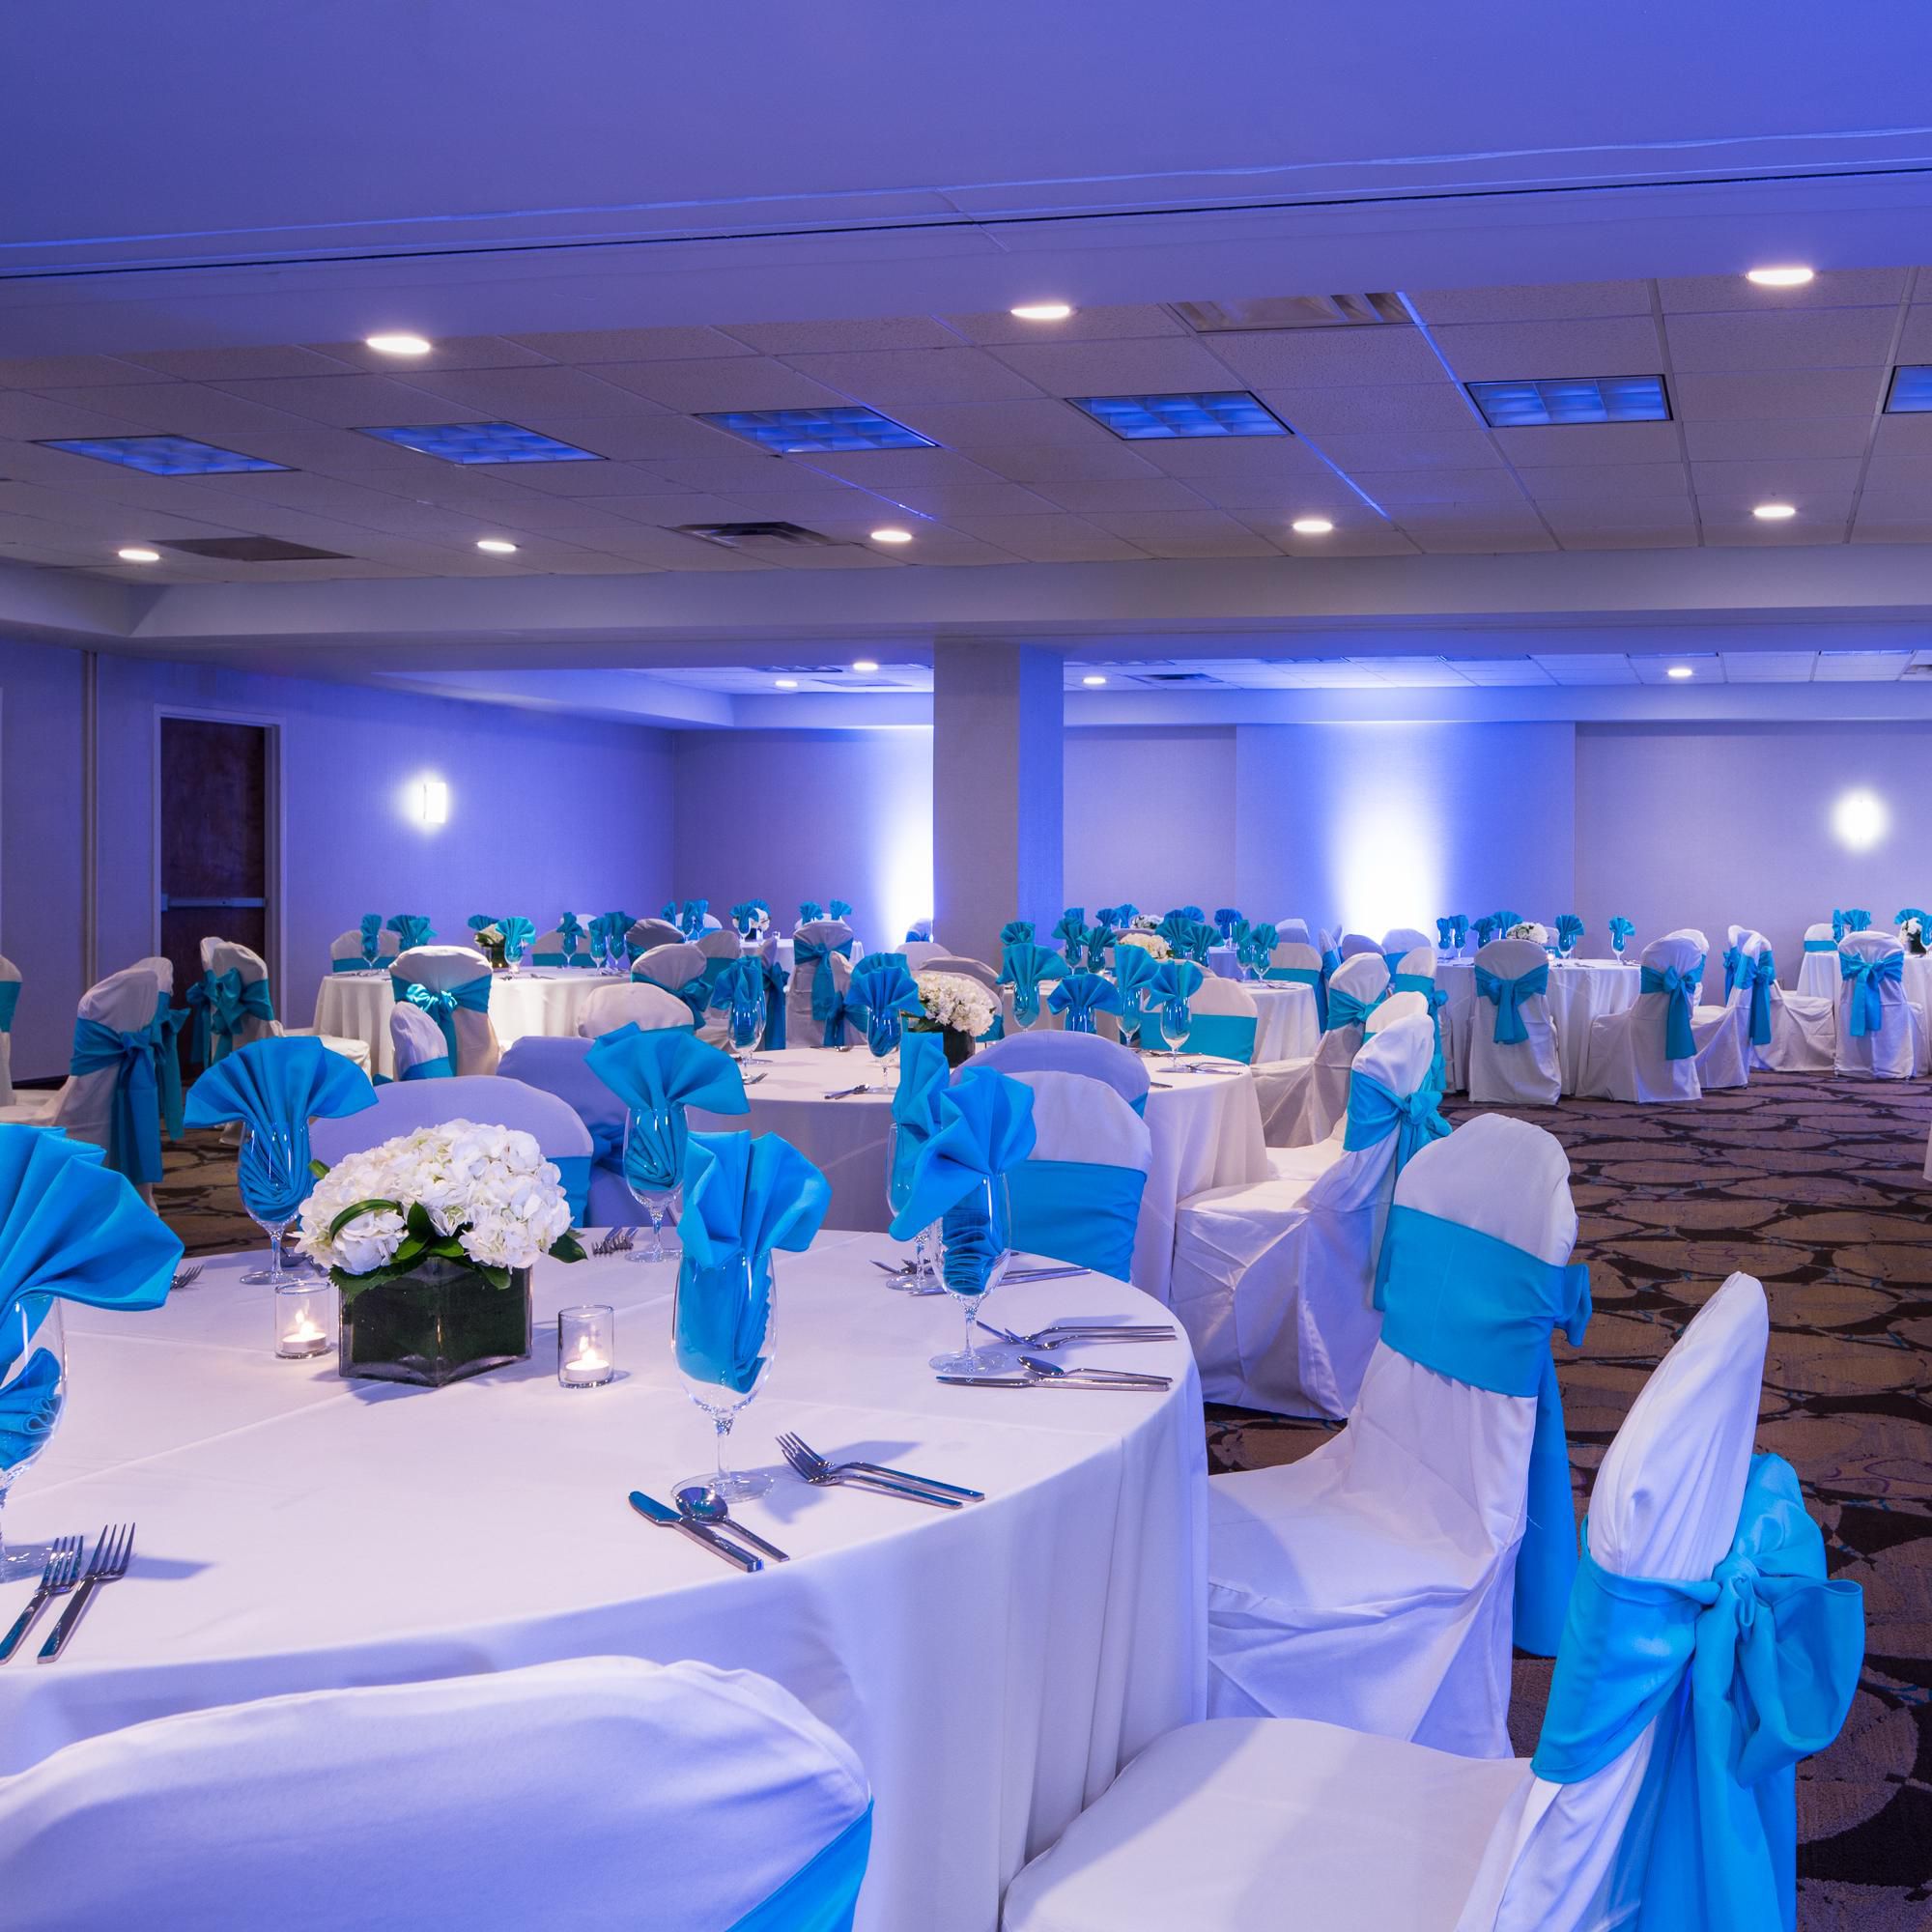 We would be thrilled to host your wedding in downtown Memphis 